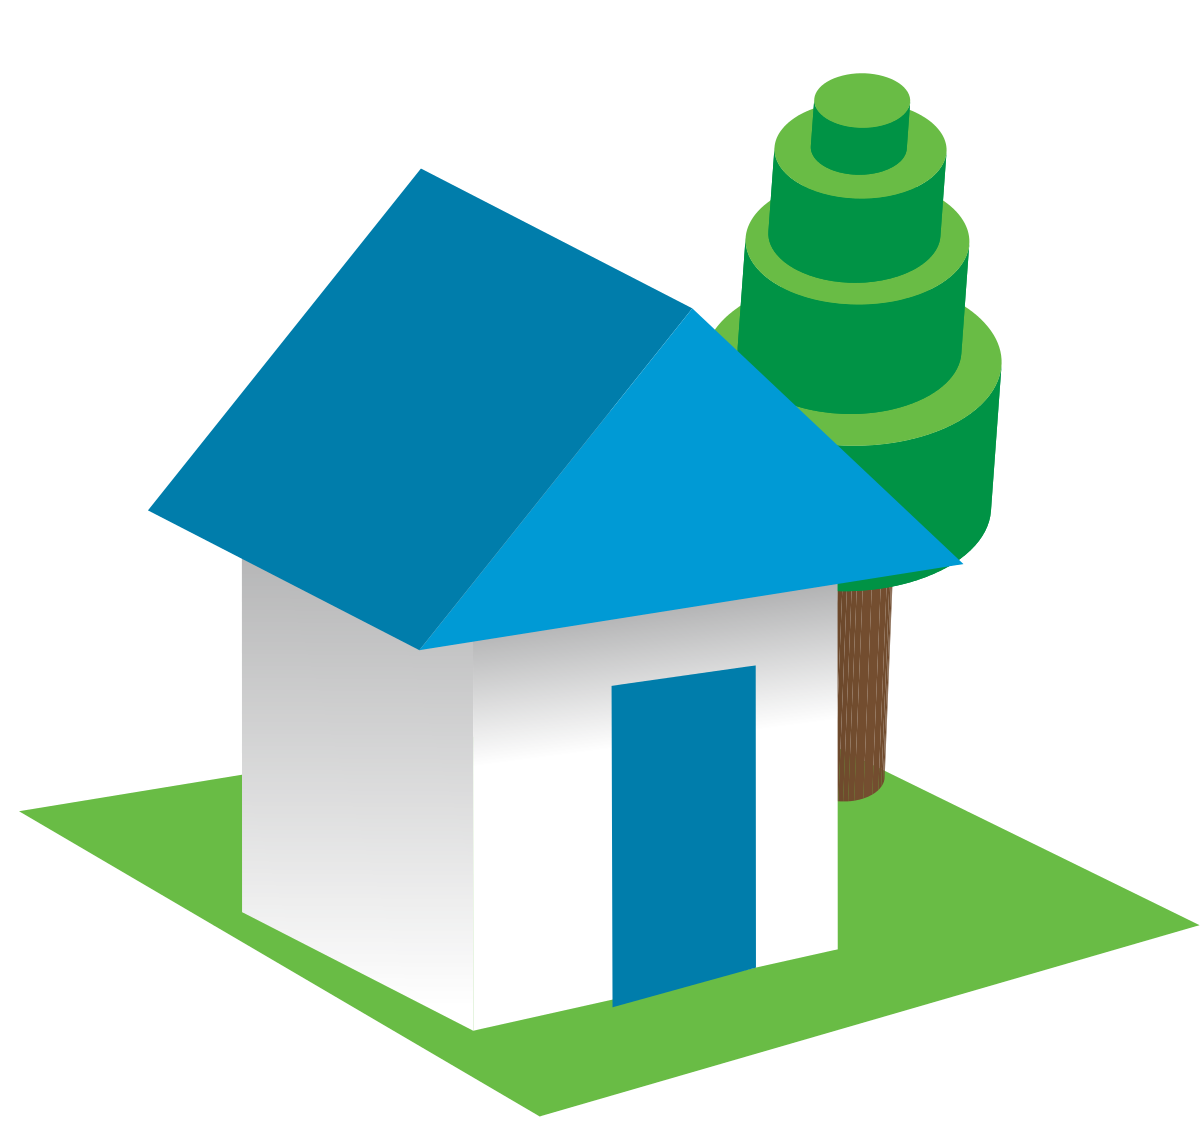 house icon clipart - photo #44